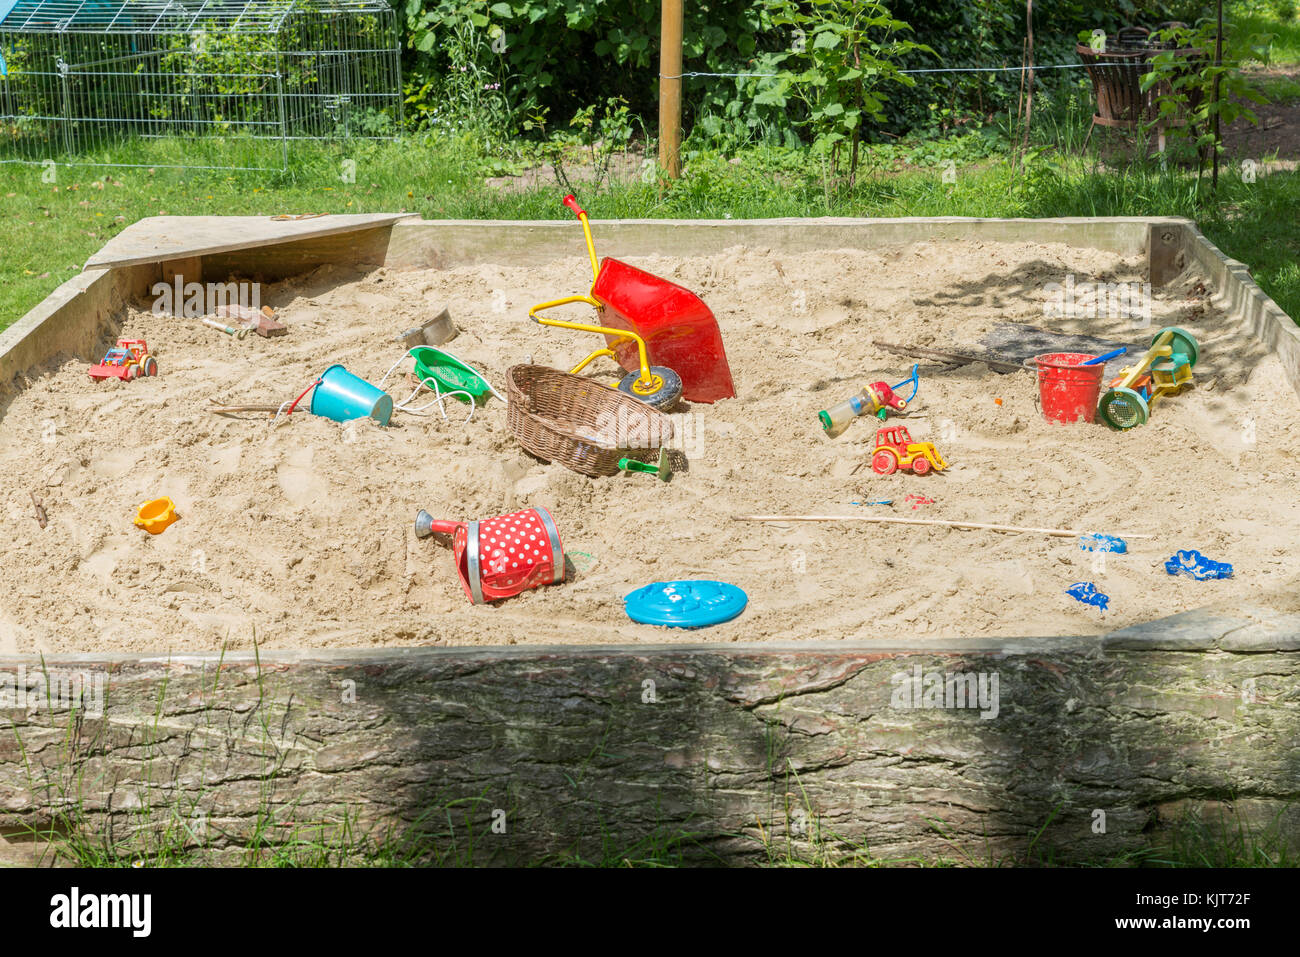 Big sandbox with many toys in a garden Stock Photo